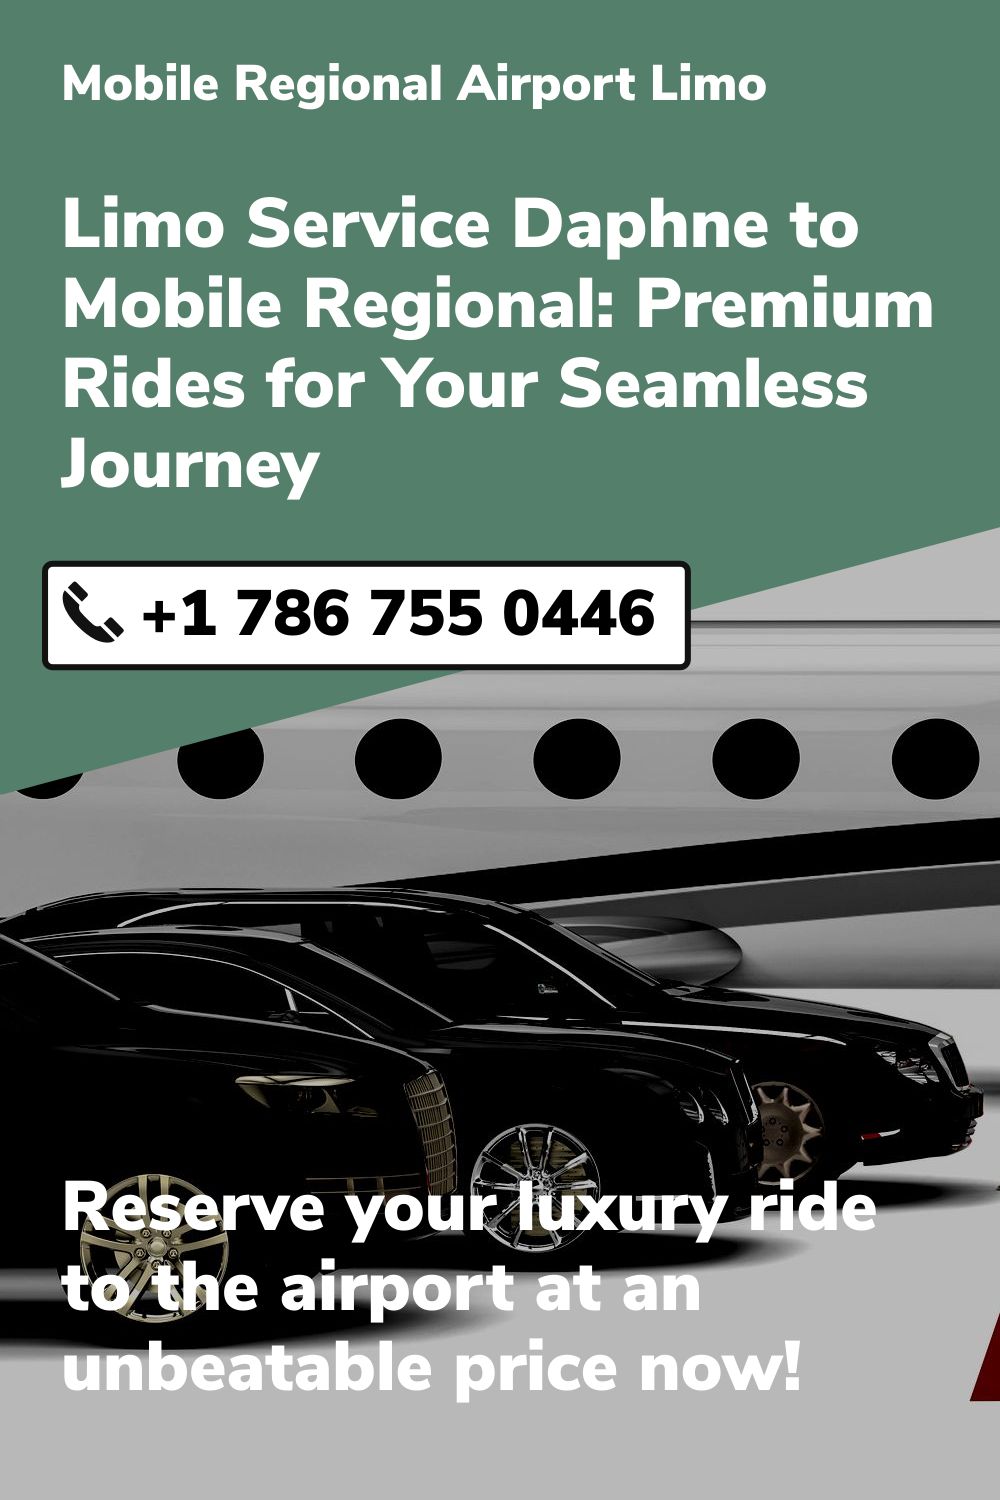 Mobile Regional Airport Limo